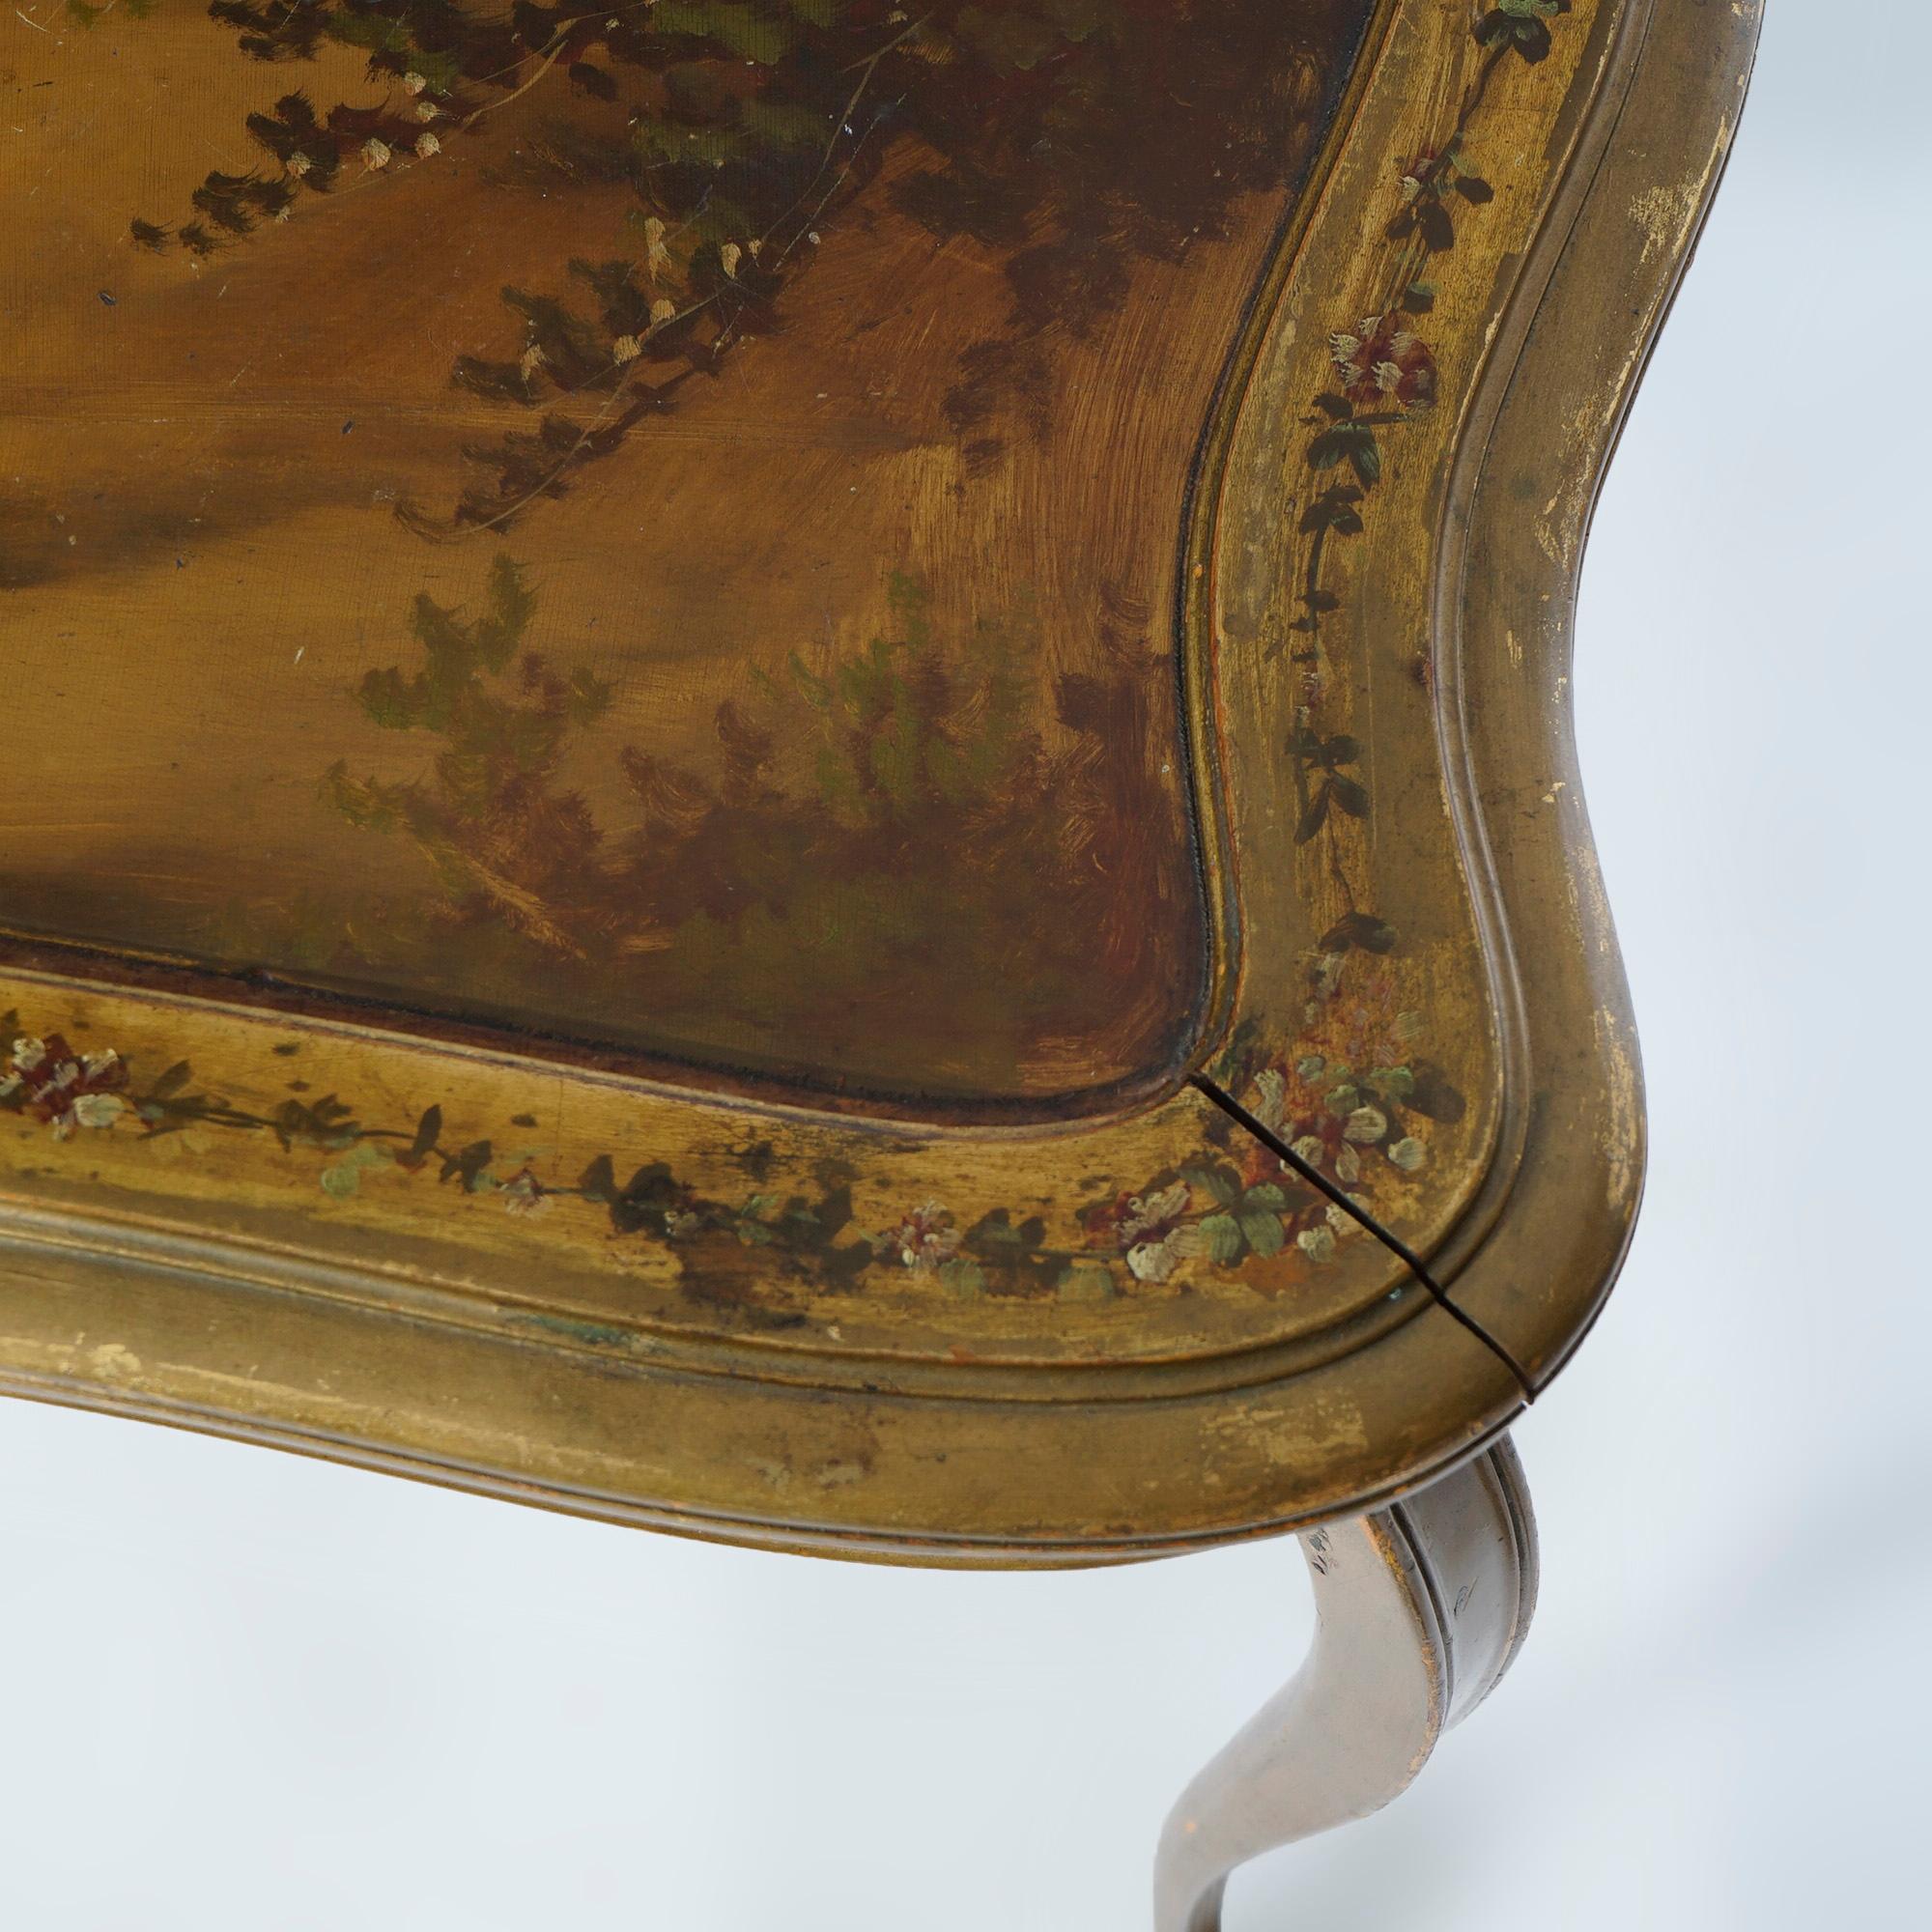 Antique French Vernis Martin Decorated Giltwood Table 19th C For Sale 3